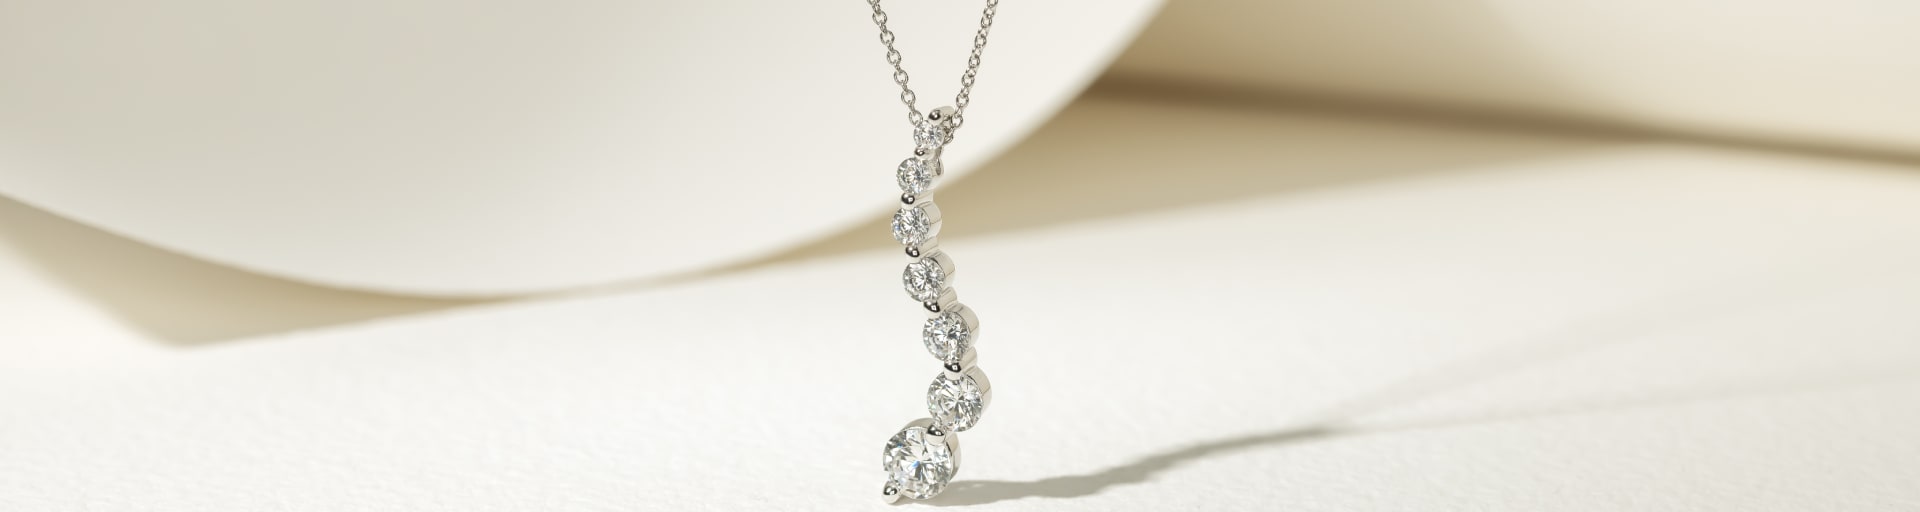 1 Necklace, 4 Styles: A Must-Have Chain Necklace for Timeless Elegance